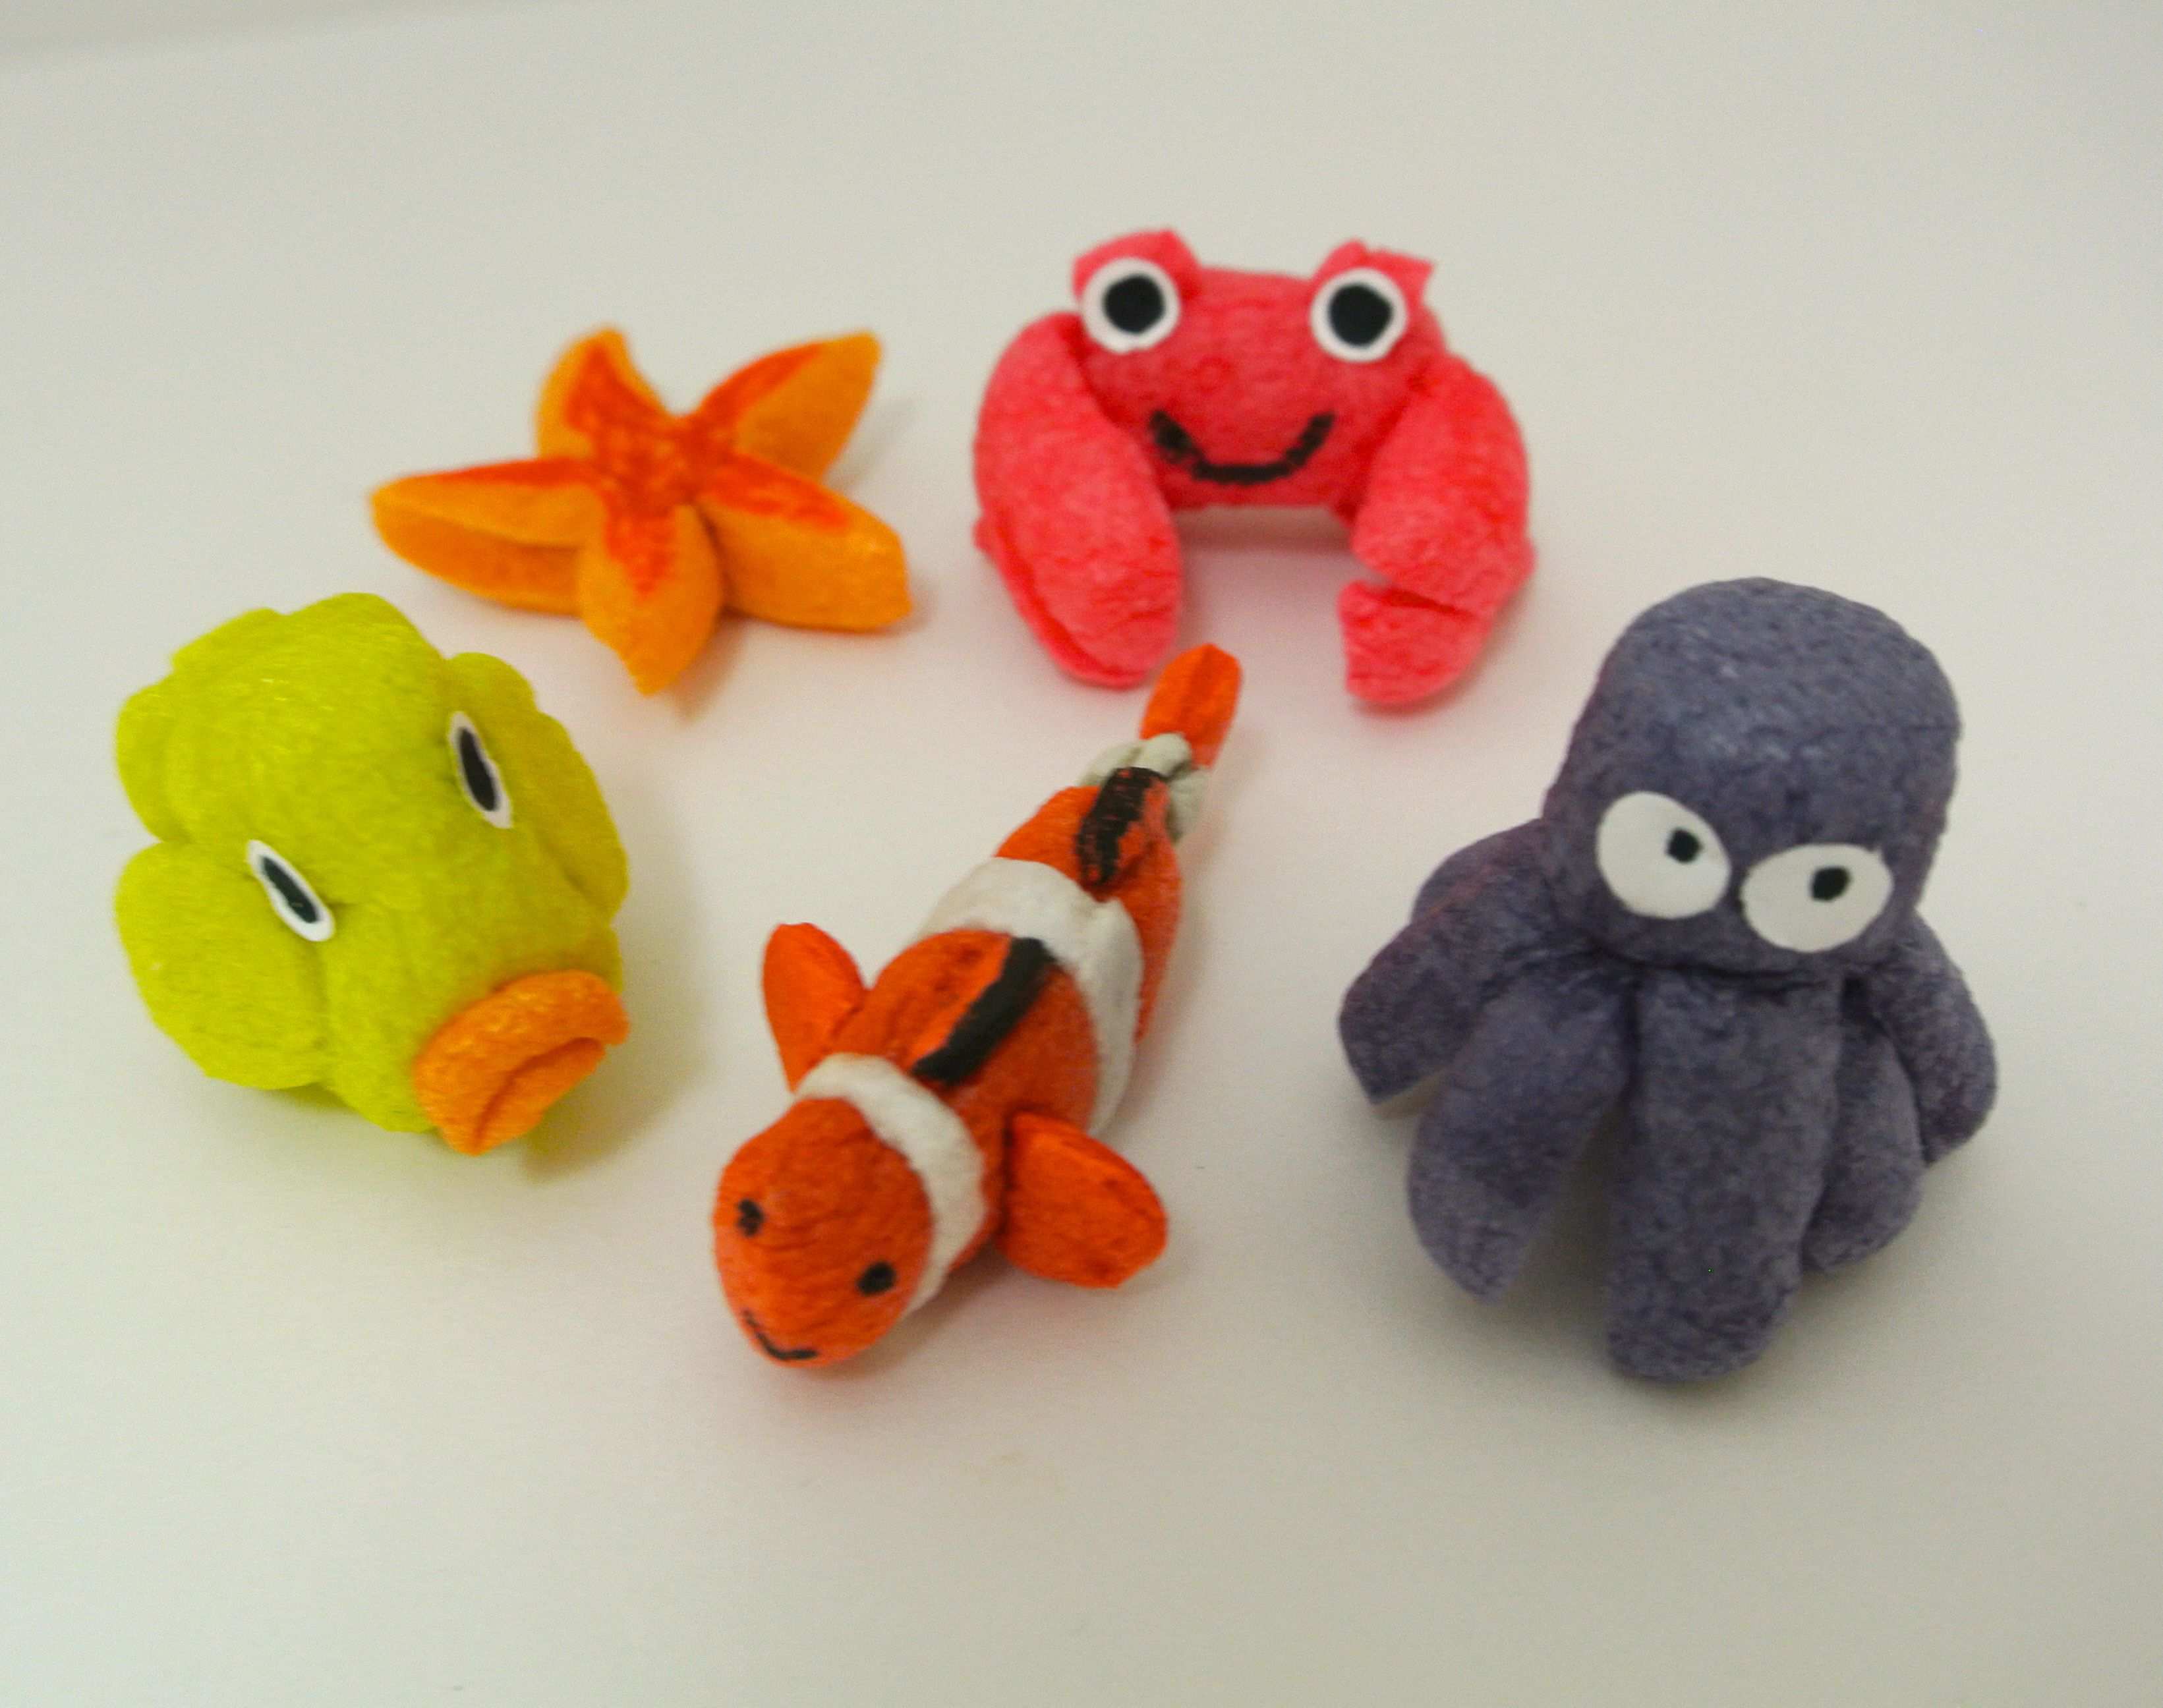 Sea Creatures Made With Magic Nuudles The Perfect Craft For An Under The Sea Birthday P Under The Sea Crafts Birthday Party Crafts Pirate Themed Birthday Party